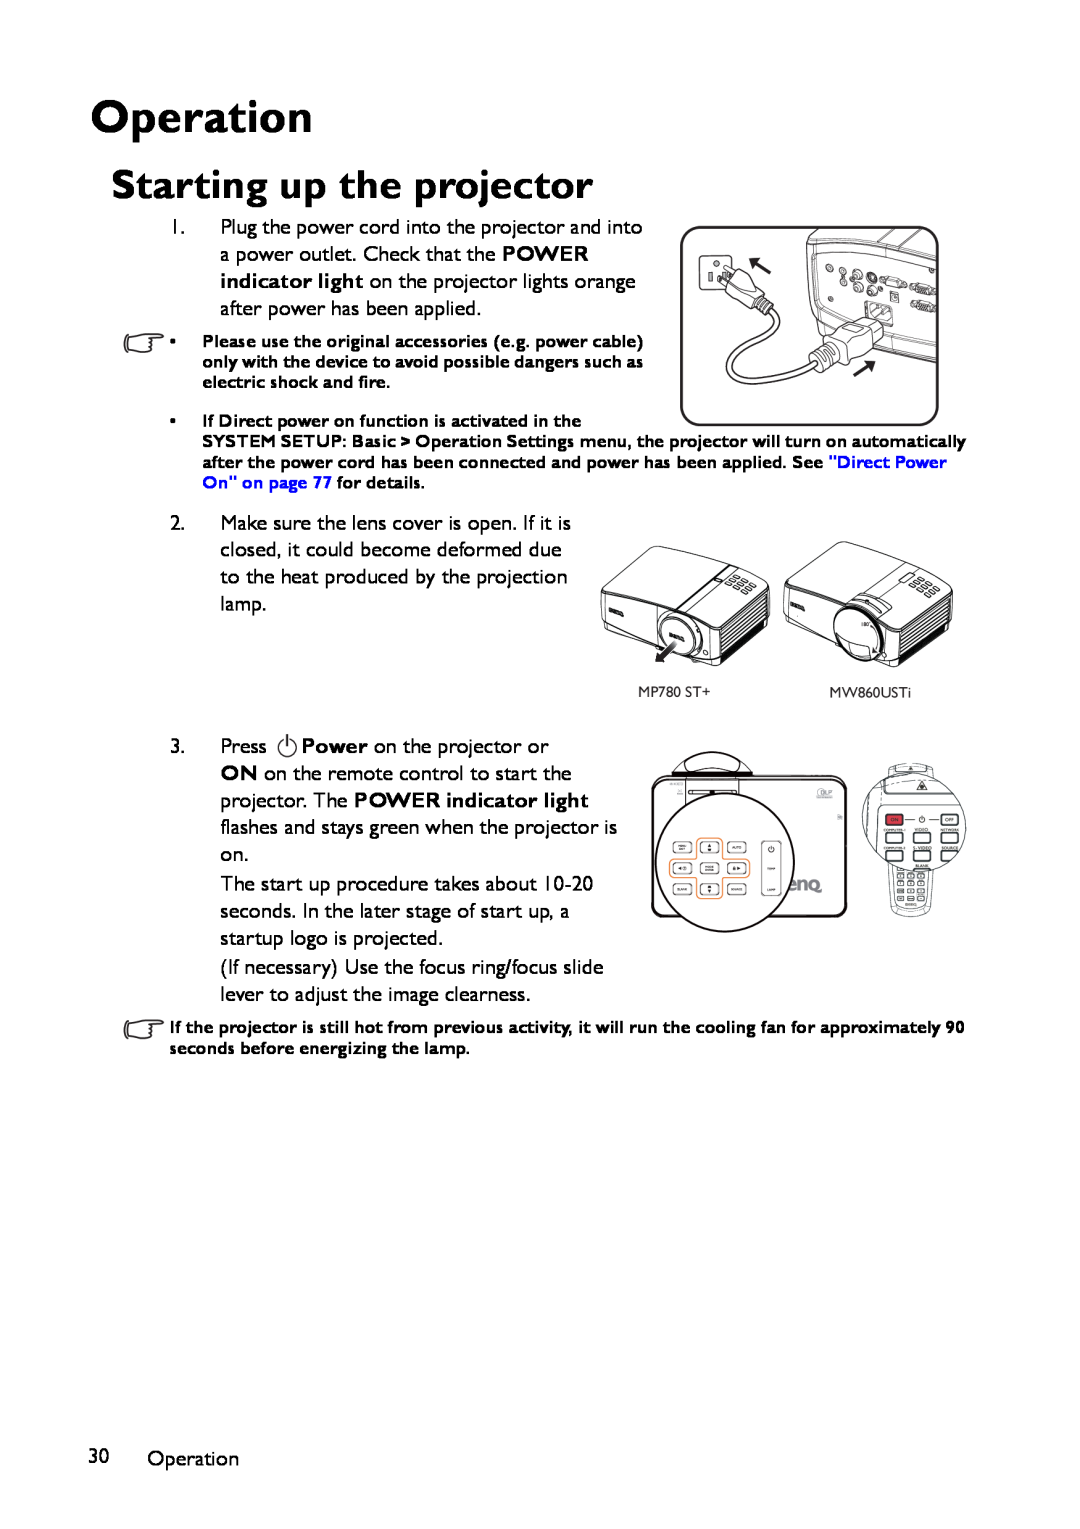 BenQ MP780 ST+, MW860USTi user manual Operation, Starting up the projector 